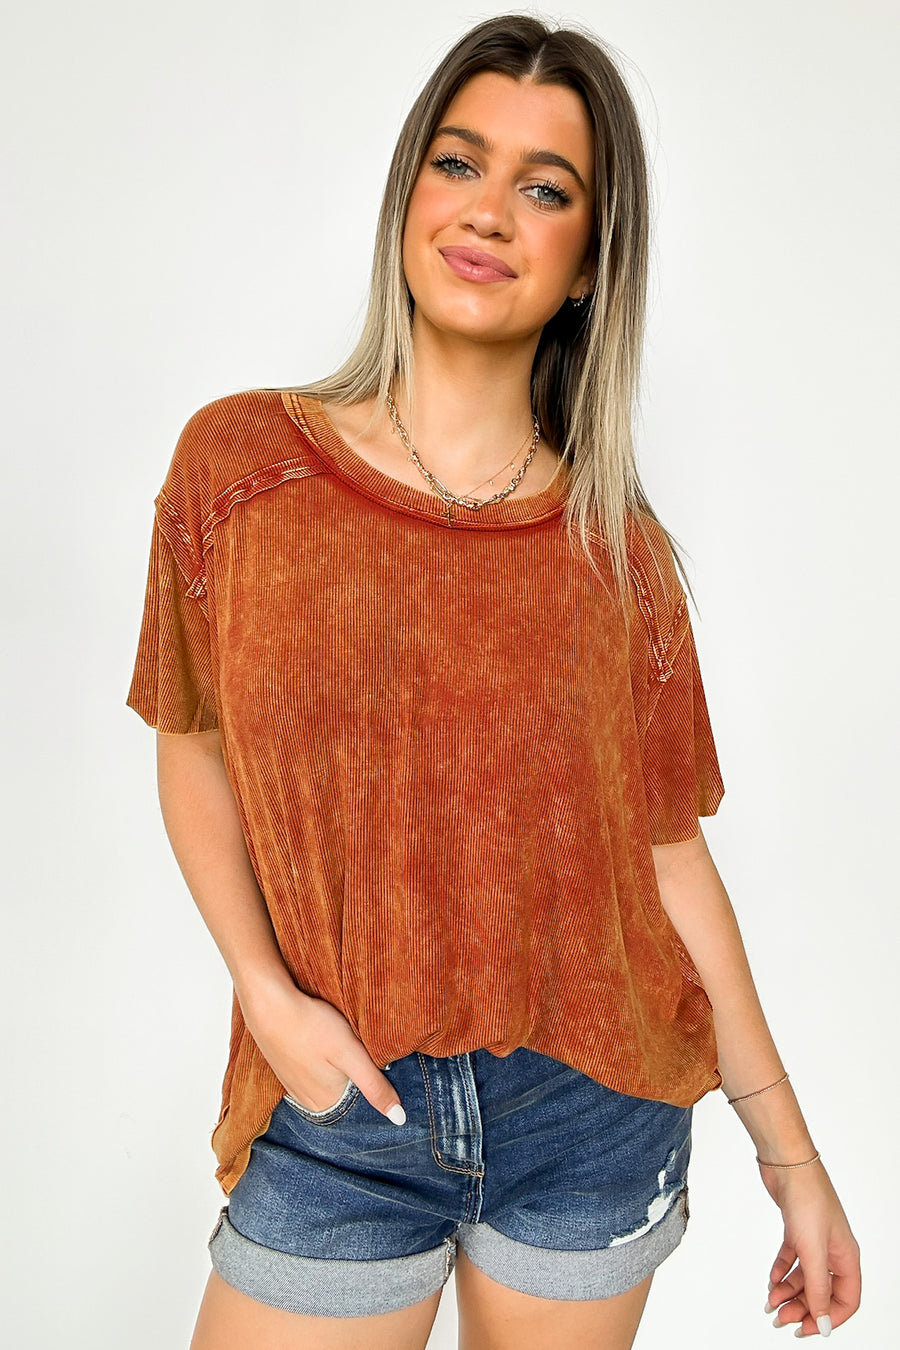 Mirissa Mineral Washed Boat Neck Top - BACK IN STOCK